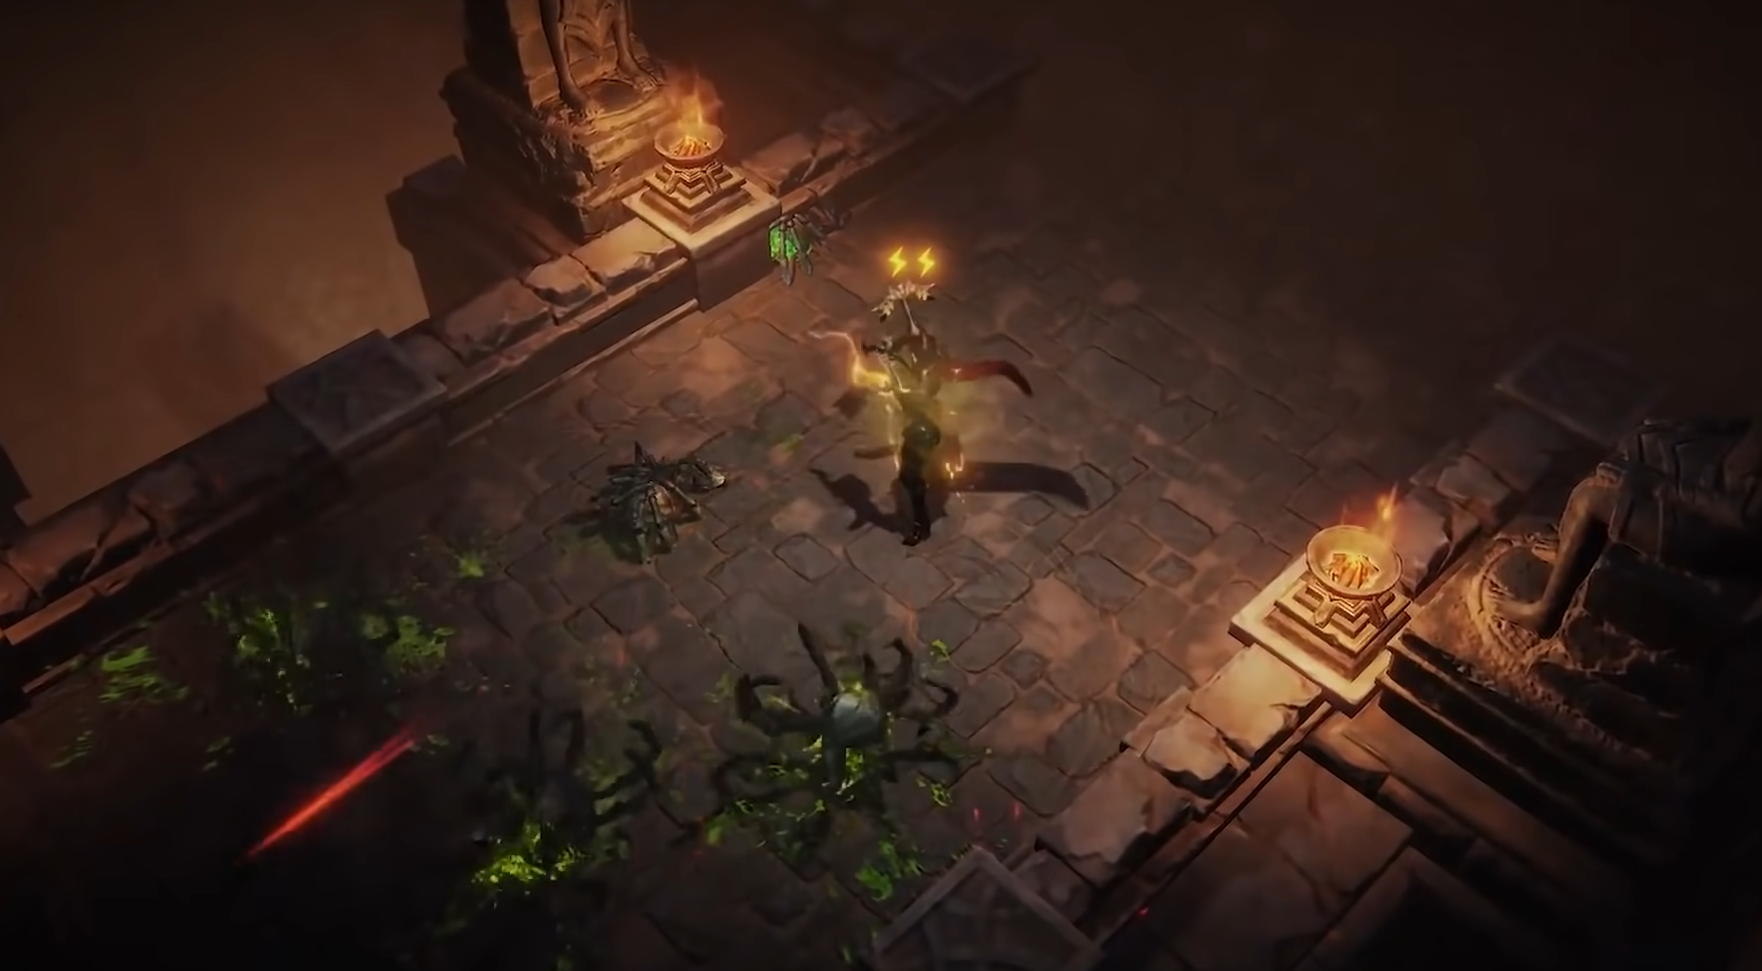 diablo 4 microtransactions confirmed by blizzard on top of paid expansions, concerns mount reddit